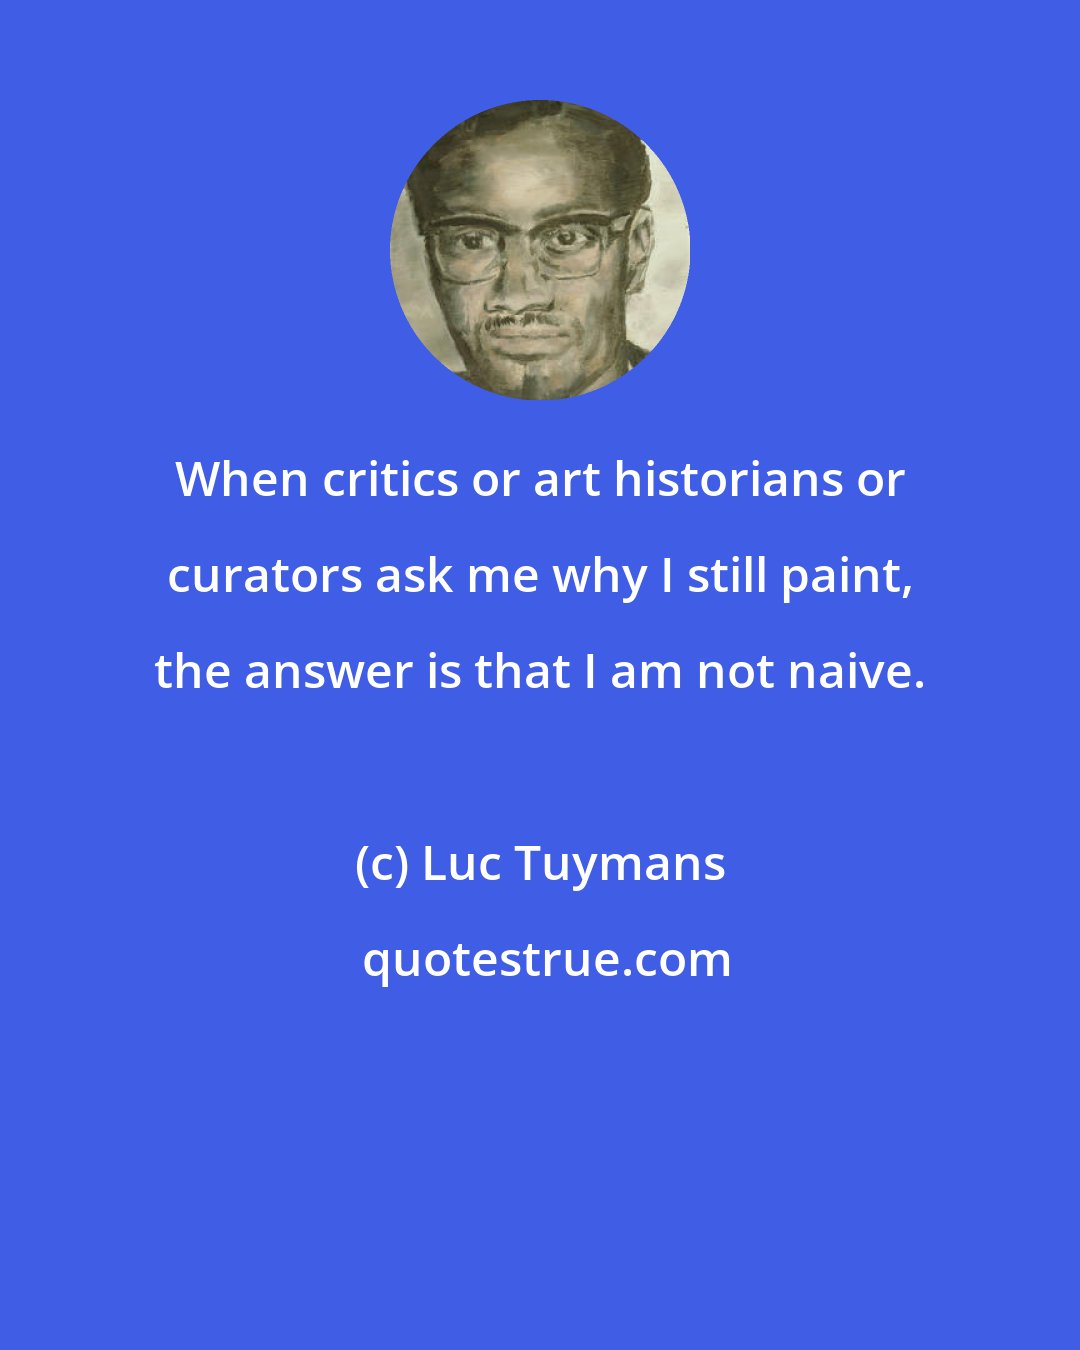 Luc Tuymans: When critics or art historians or curators ask me why I still paint, the answer is that I am not naive.